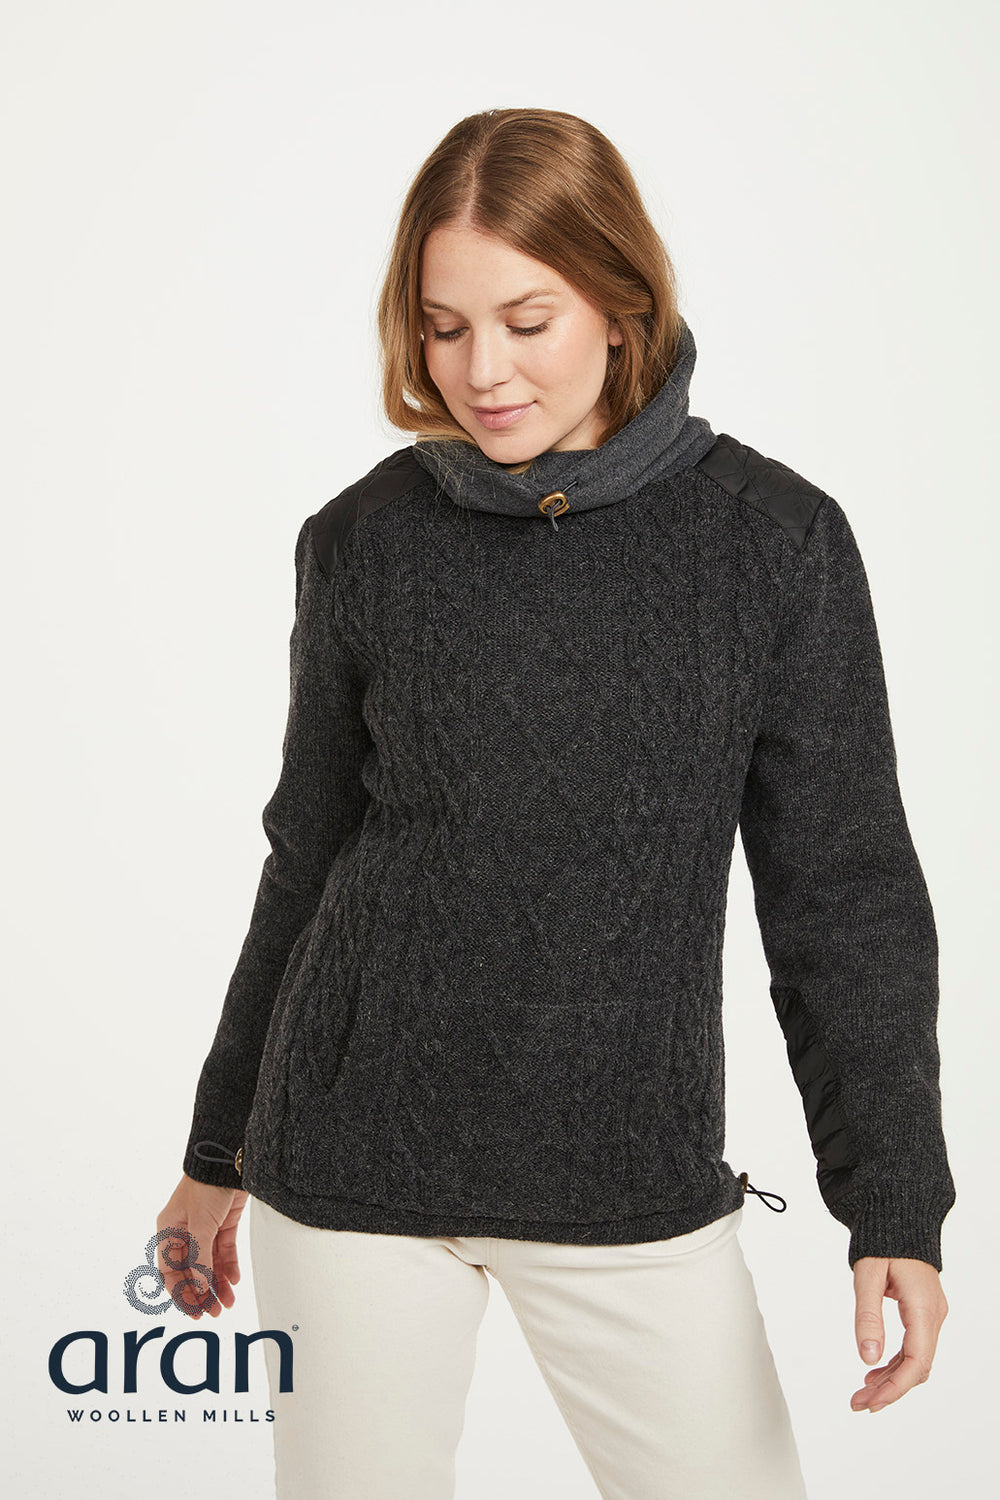 Country Life Cowlneck Wool Sweater